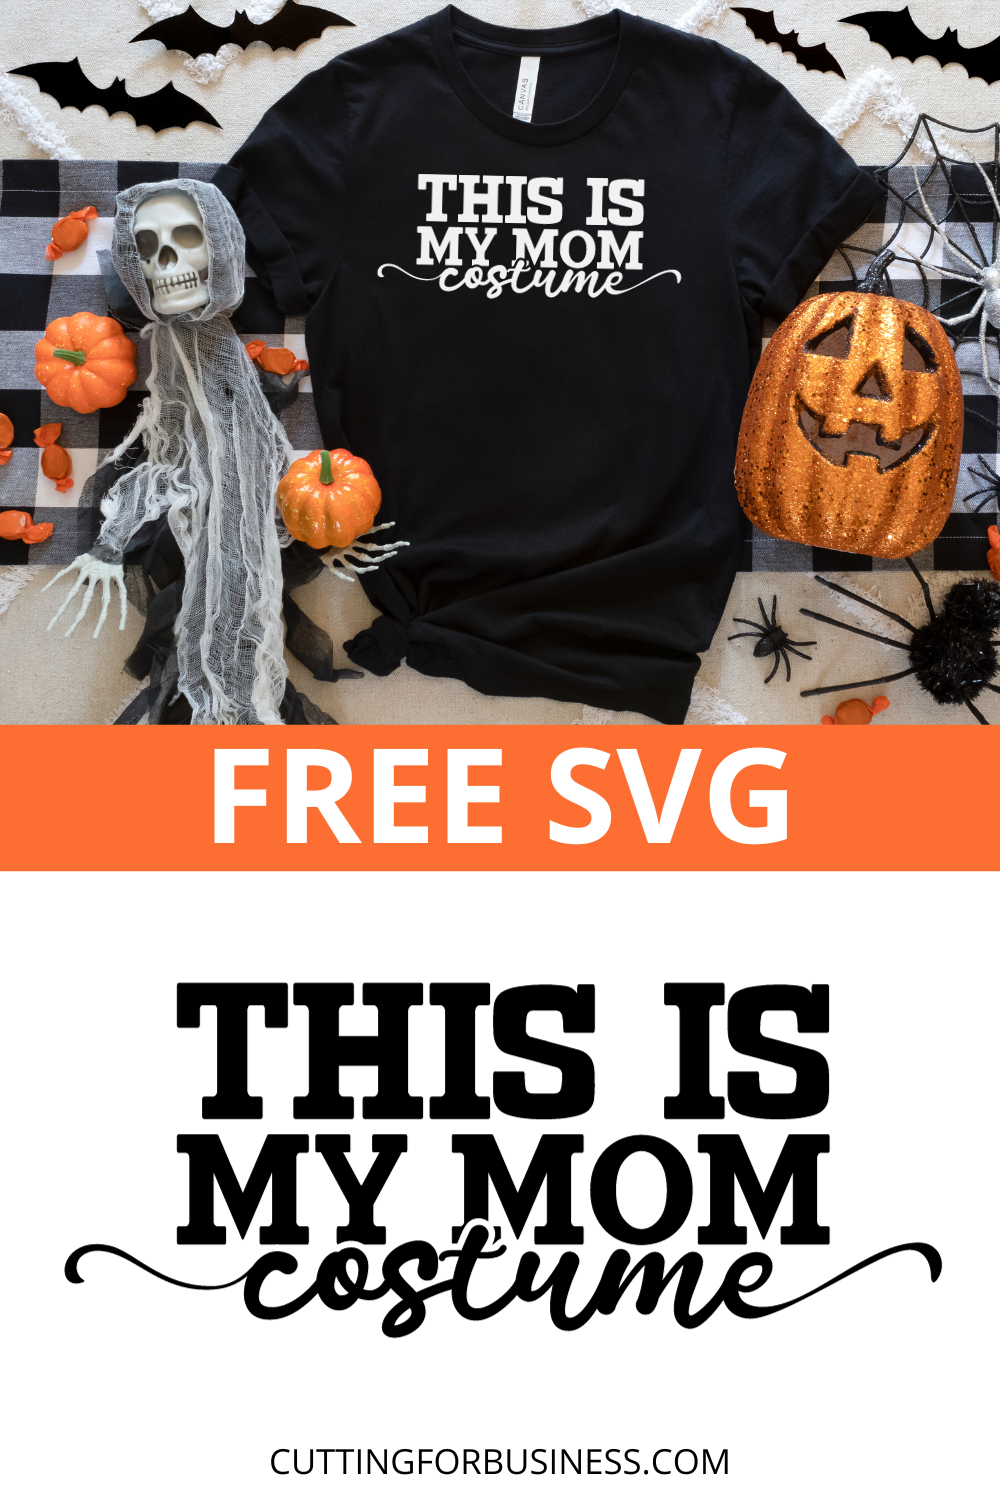 This is My Mom Costume SVG - cuttingforbusiness.com